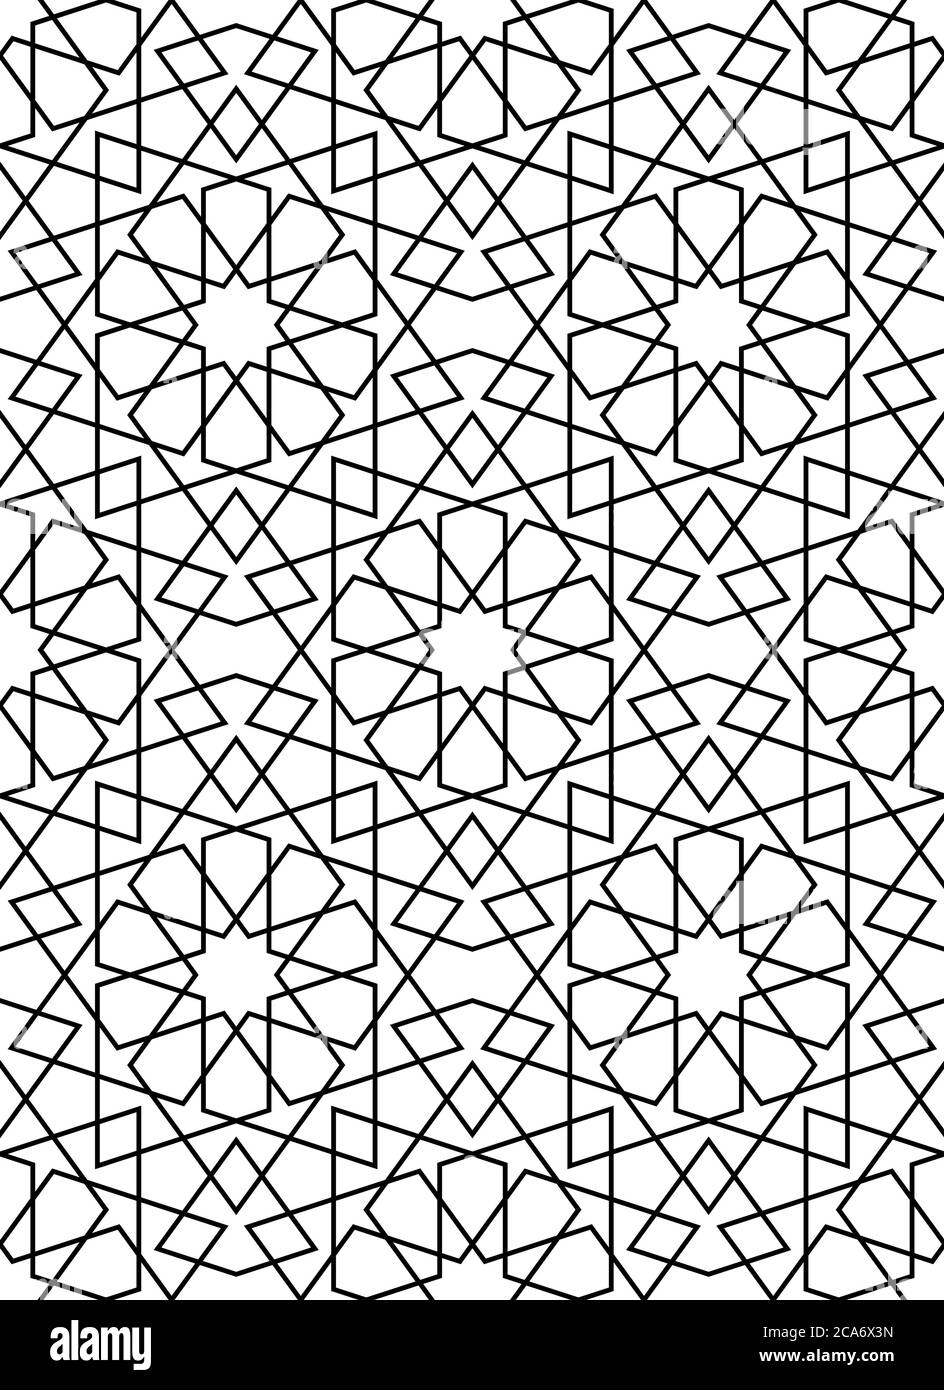 Seamless geometric ornament based on traditional islamic art muslim mosaicblack and white linesgreat design for fabrictextilecoverwrapping paper stock vector image art